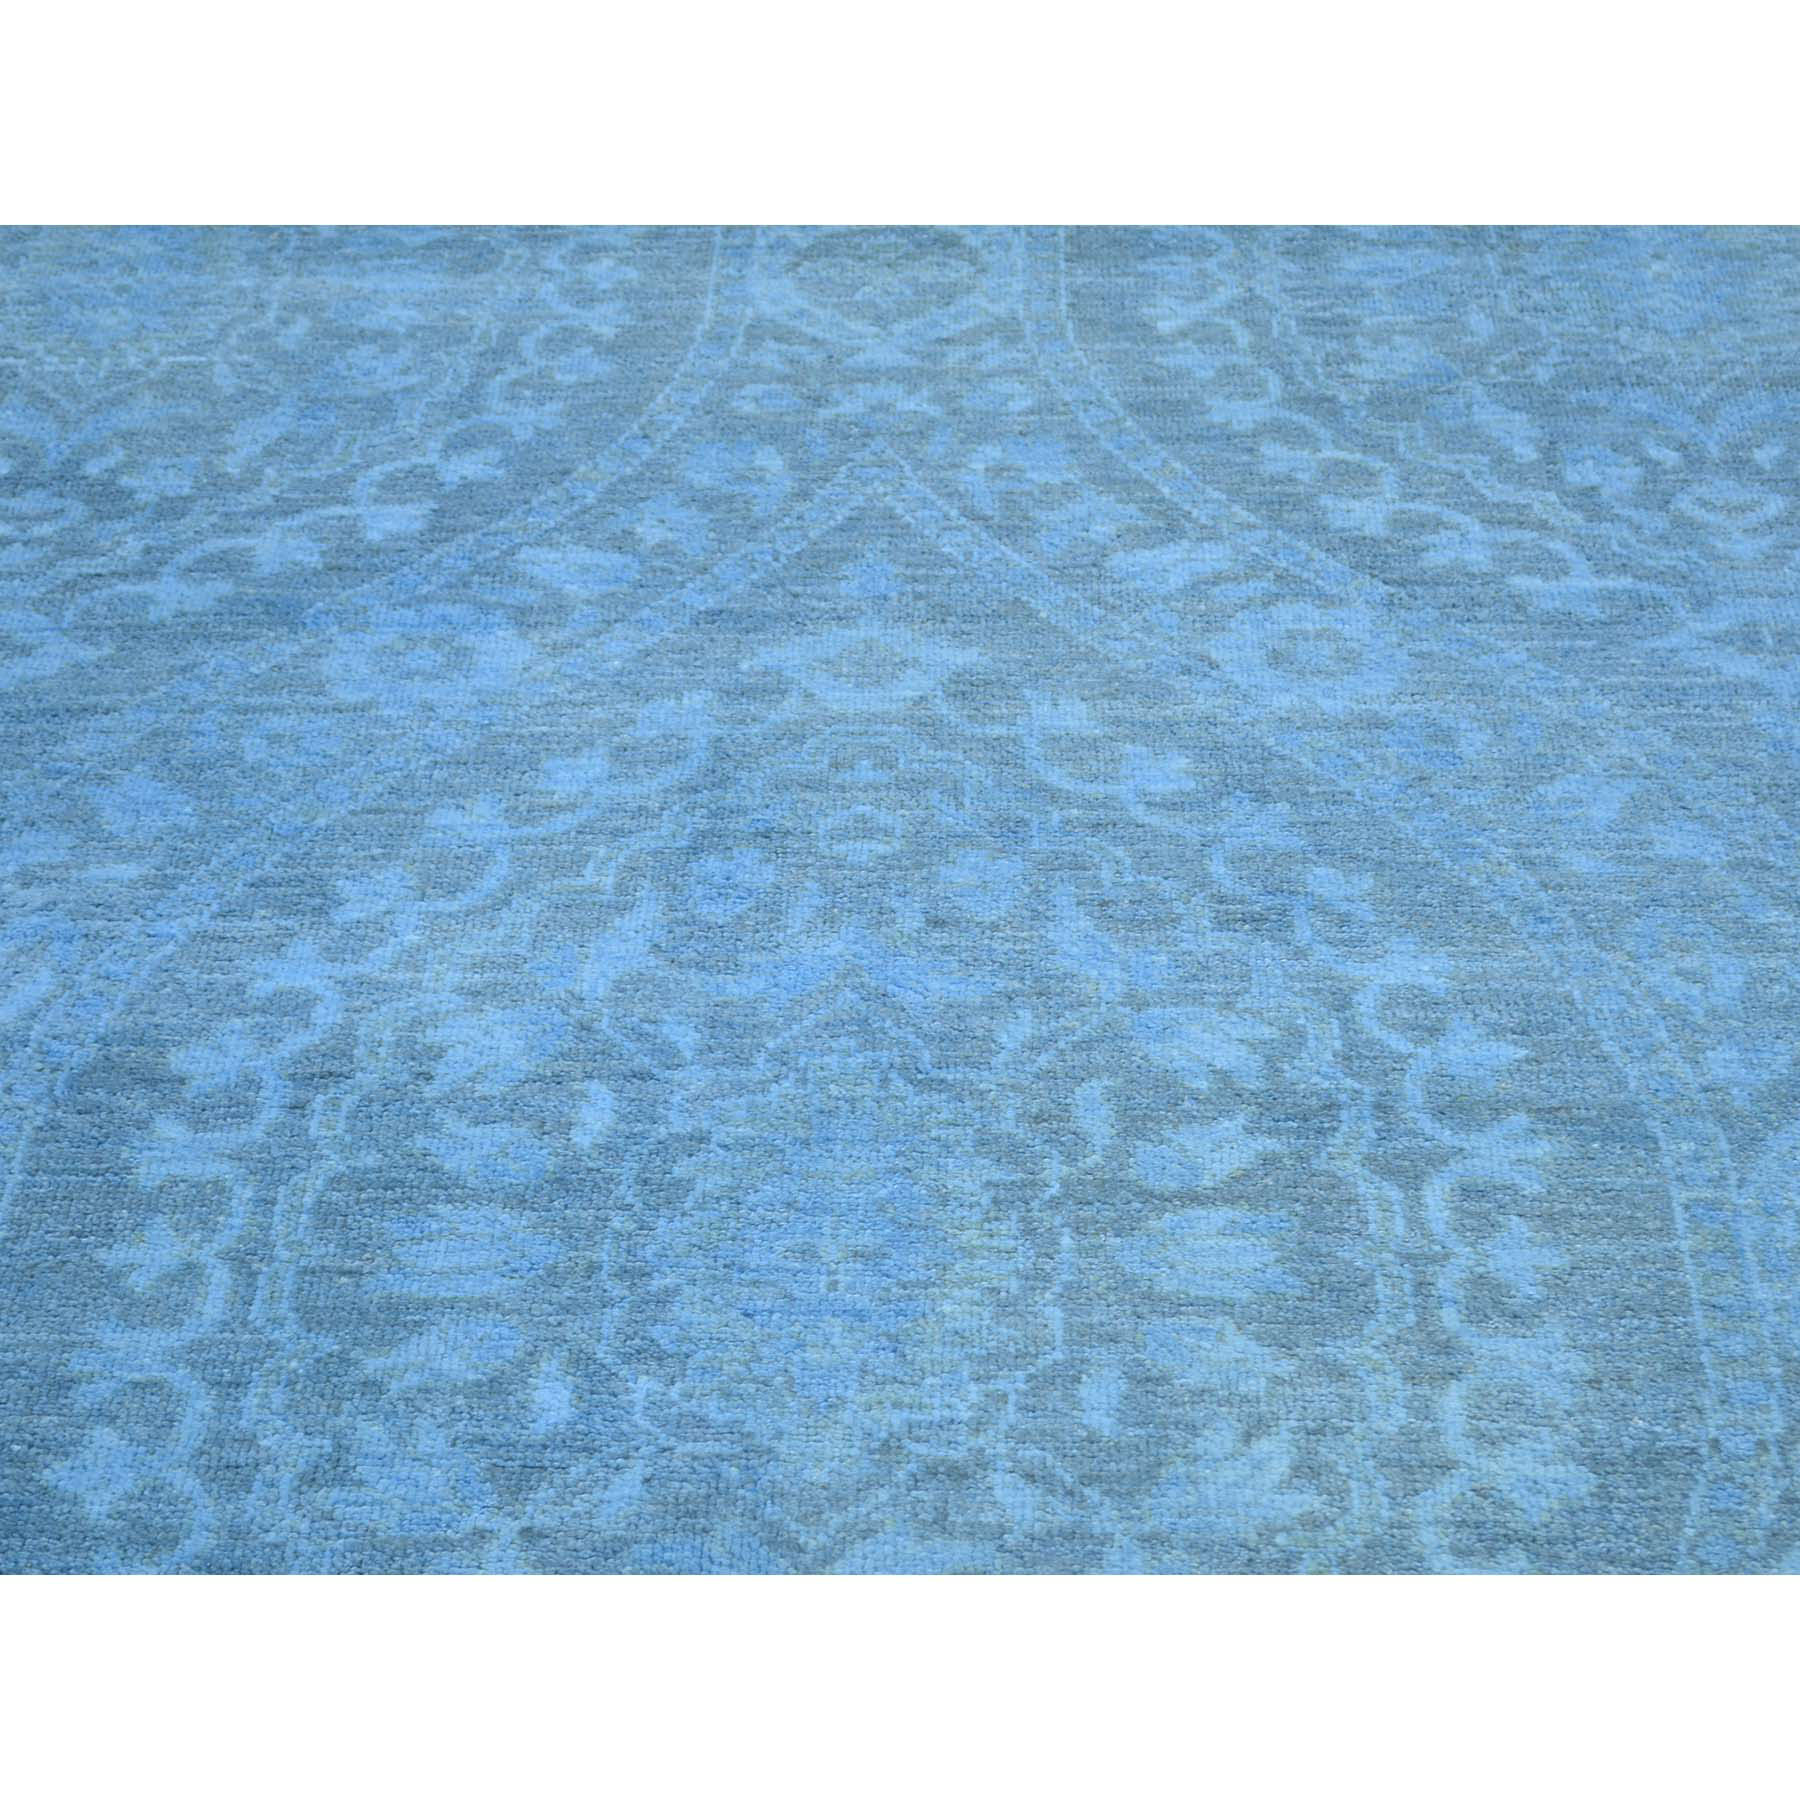 5-1 x7-2  Hand-Knotted Overdyed Ikat With Moughal Design Oriental Rug 